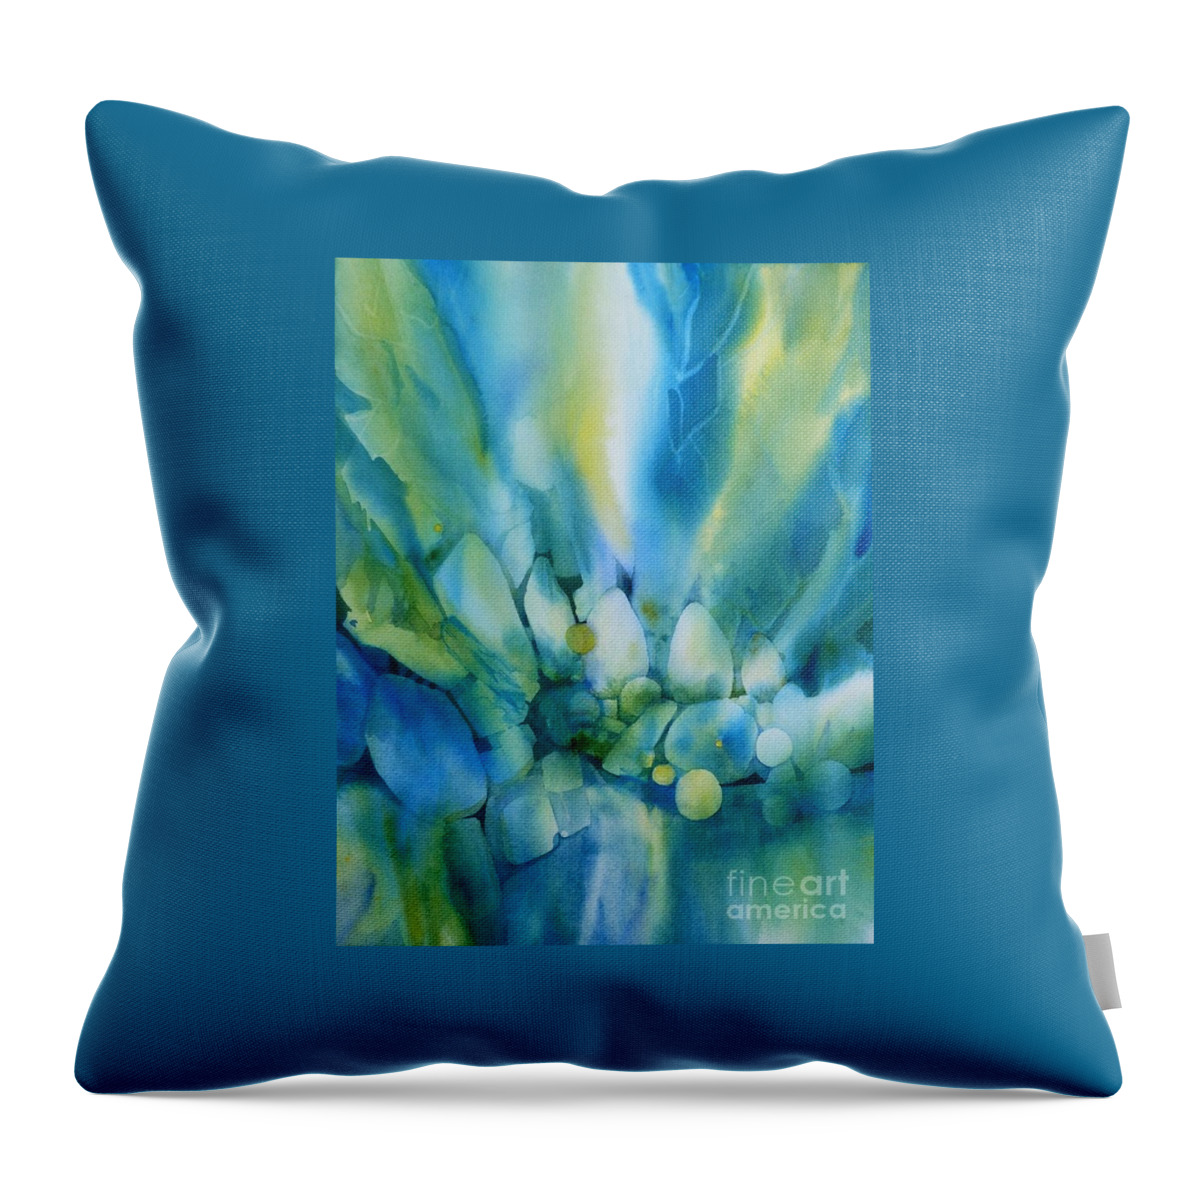 Pierres Throw Pillow featuring the painting La Lumiere Tombe by Donna Acheson-Juillet